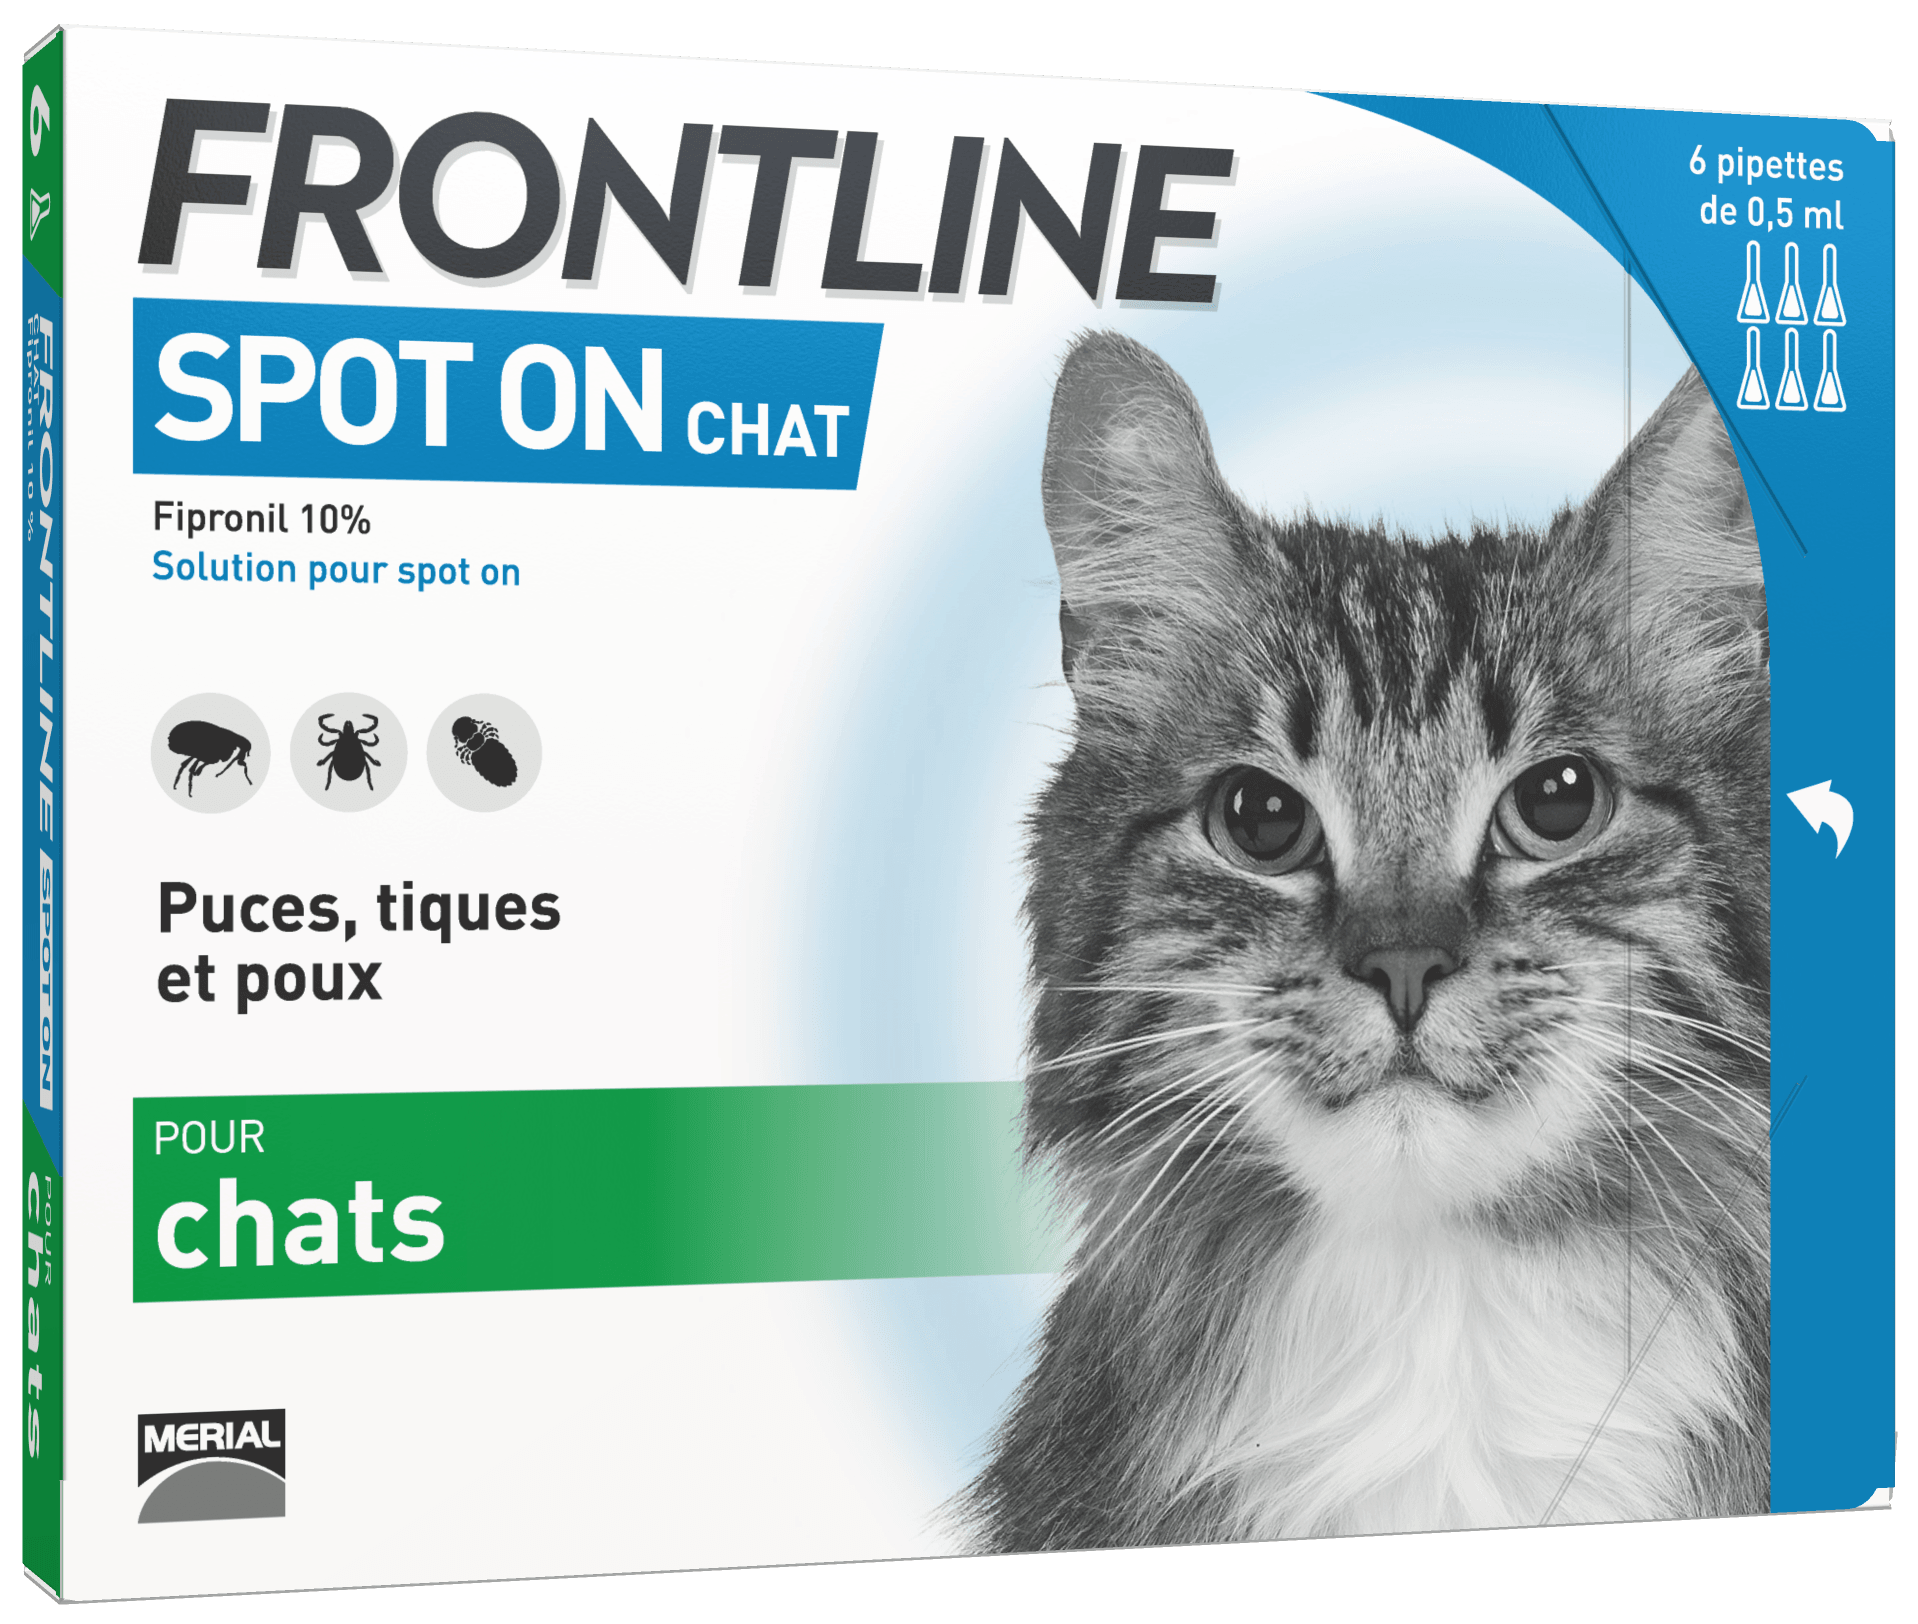 FRONTLINE Spot-On Chat